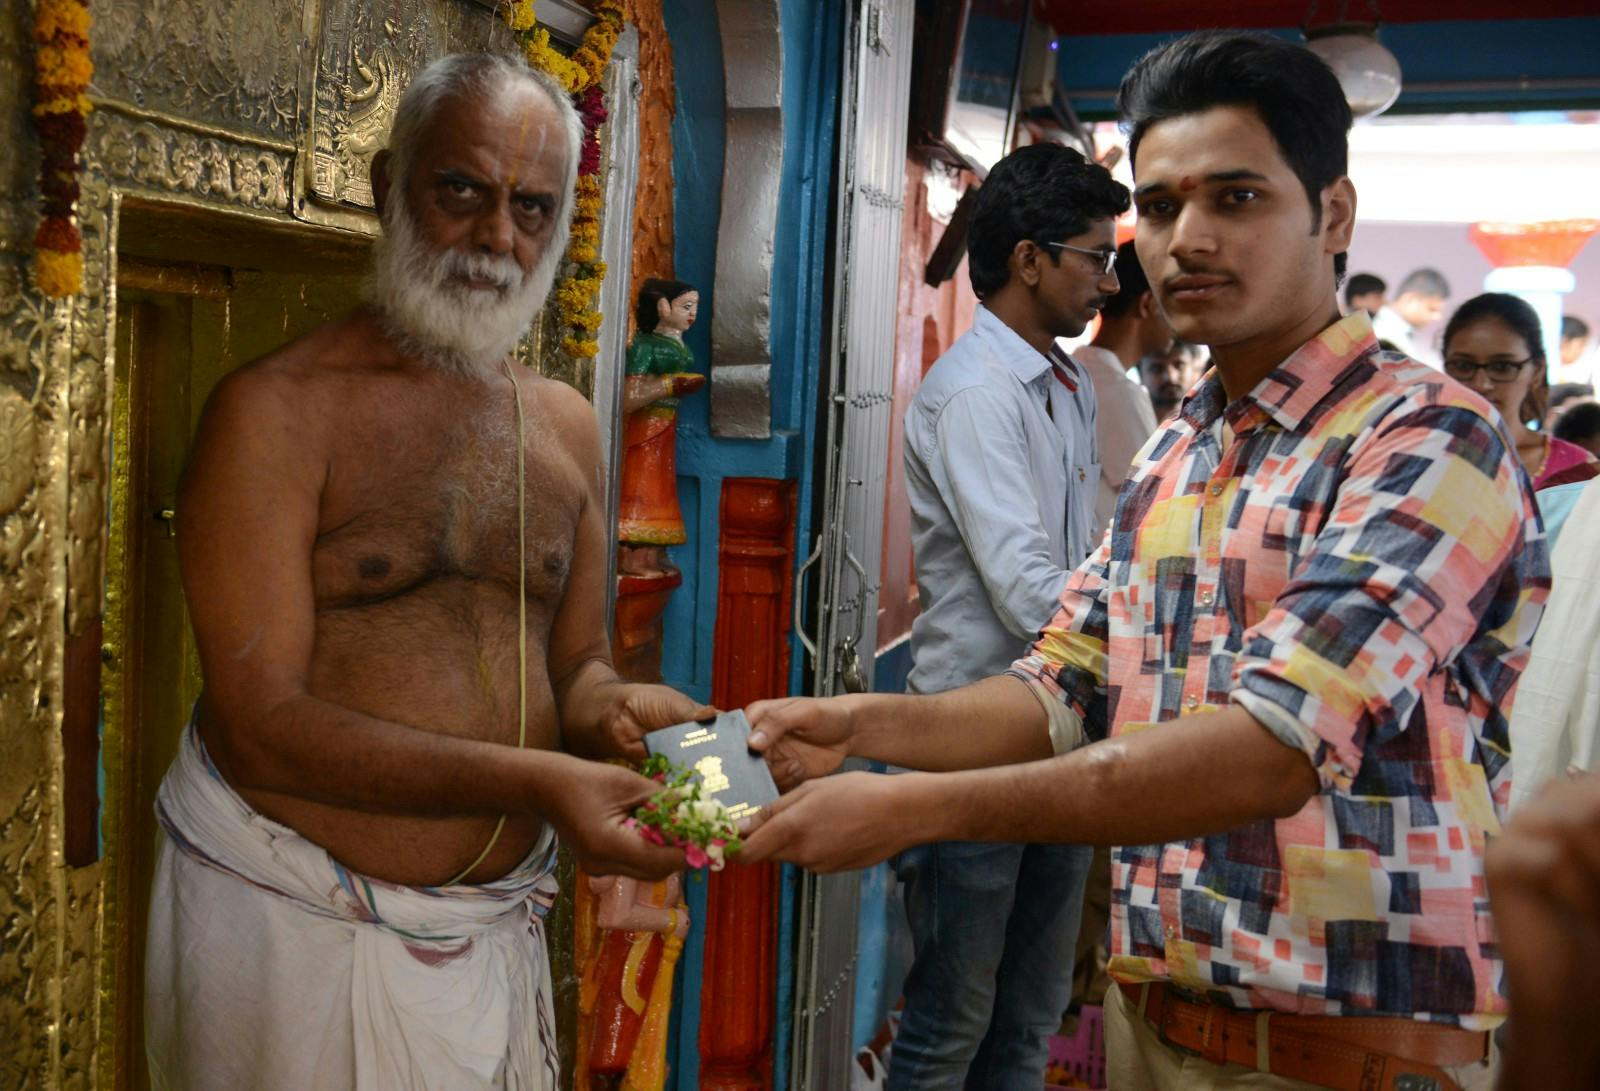 Indian Hindu devotee Rajashekar Reddy (R) receive his passport after it is blessed by a priest at the Chilkur Balaji Temple in Rangareddy, some 30 kms from Hyderabad, on April 29, 2017 (NOAH SEELAM/AFP via Getty Images)